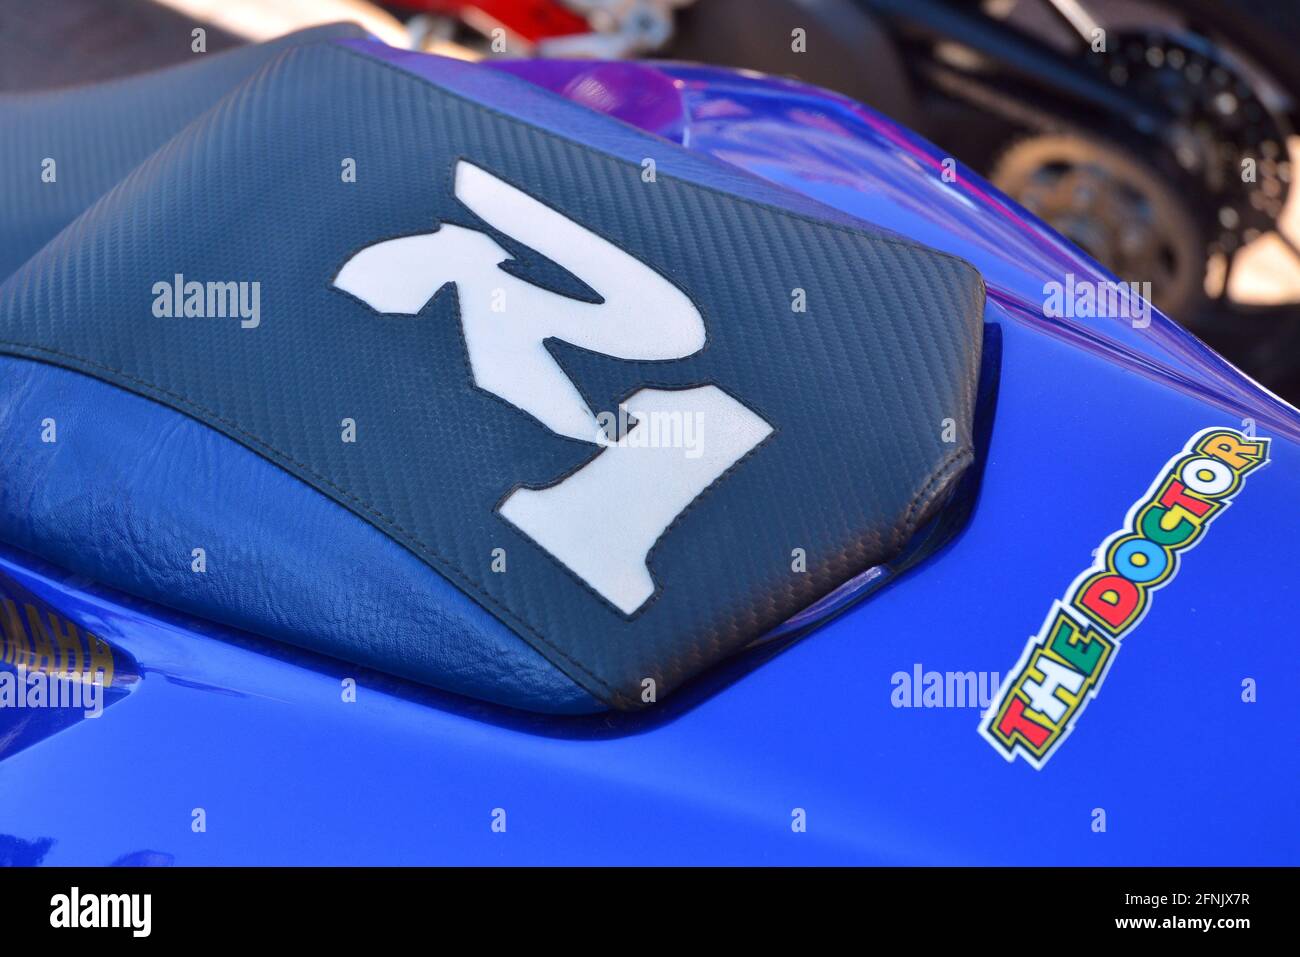 Castelnuovo don Bosco, Piedmont, Italy -09-29-2018-Meeting of motorbykes. Rear part of a  Yamaha R1 motorcycle with written on it The Doctor Stock Photo